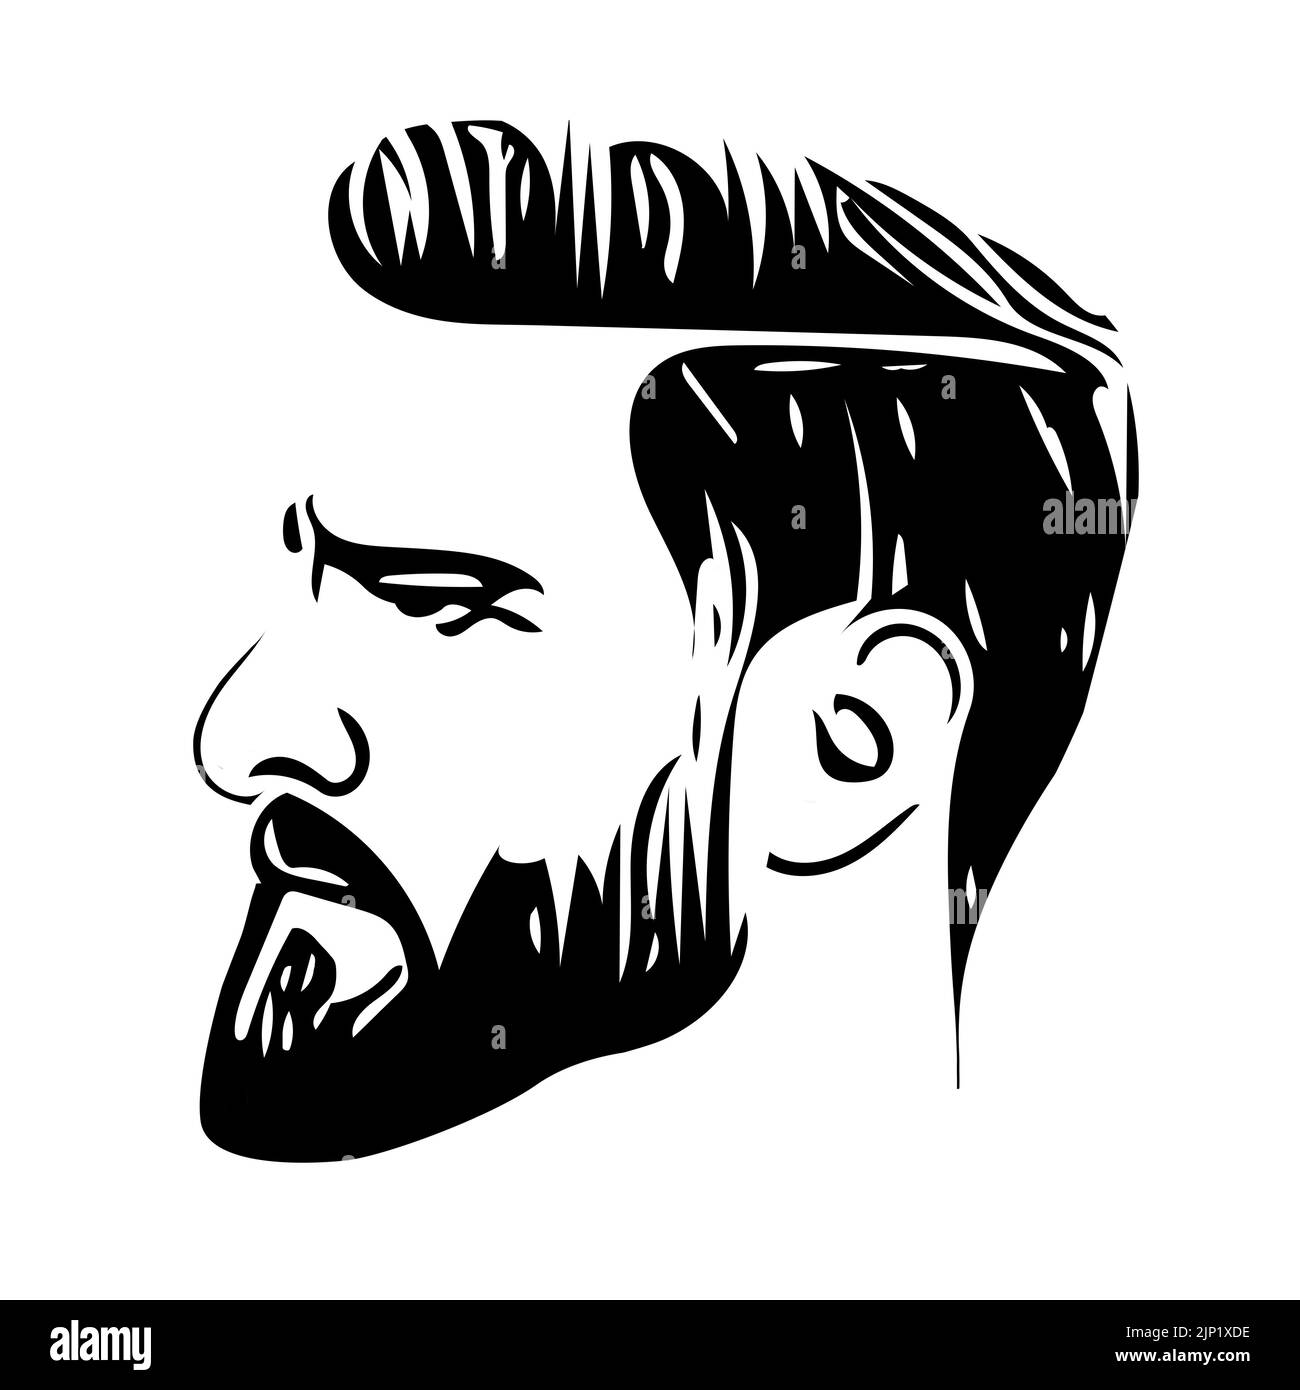 Barber shop, logotype drawn portrait of attractive man with beard. Male face profile Stock Photo